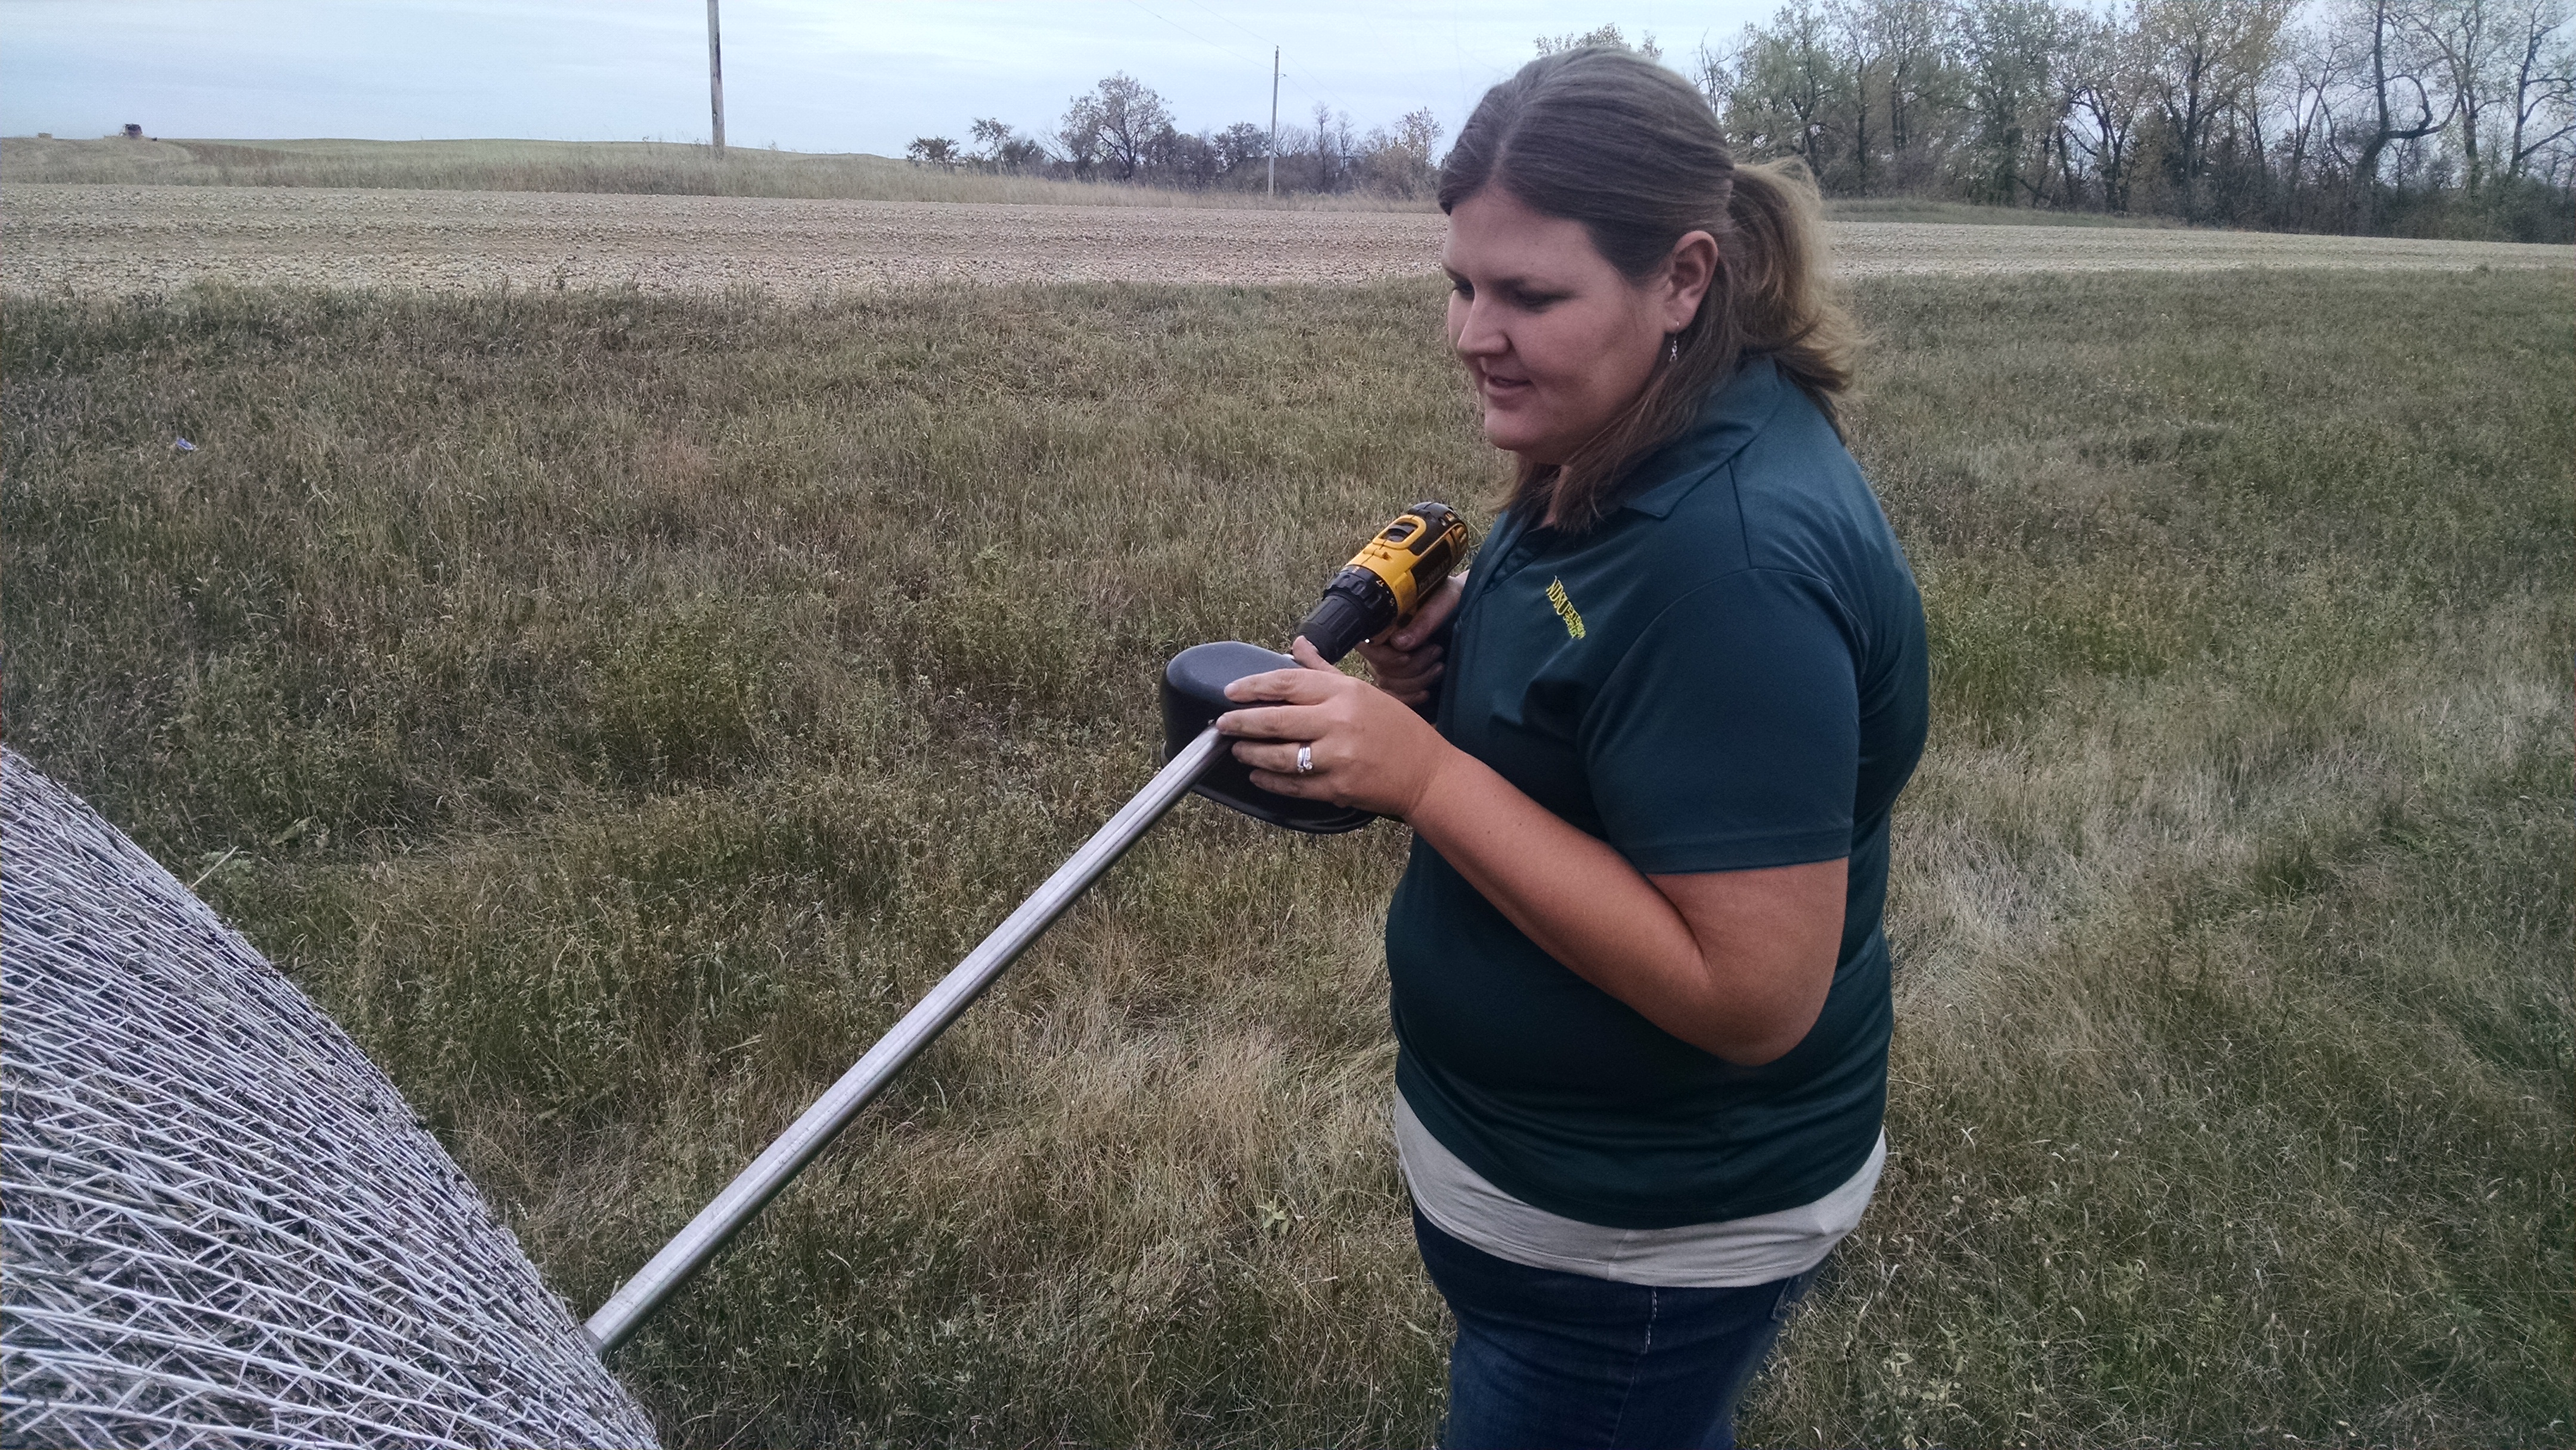 Paige Brummund, Extension agriculture and natural resources agent for Ward County, takes a sample from a hay bale for a ditch hay quality study. (NDSU photo)